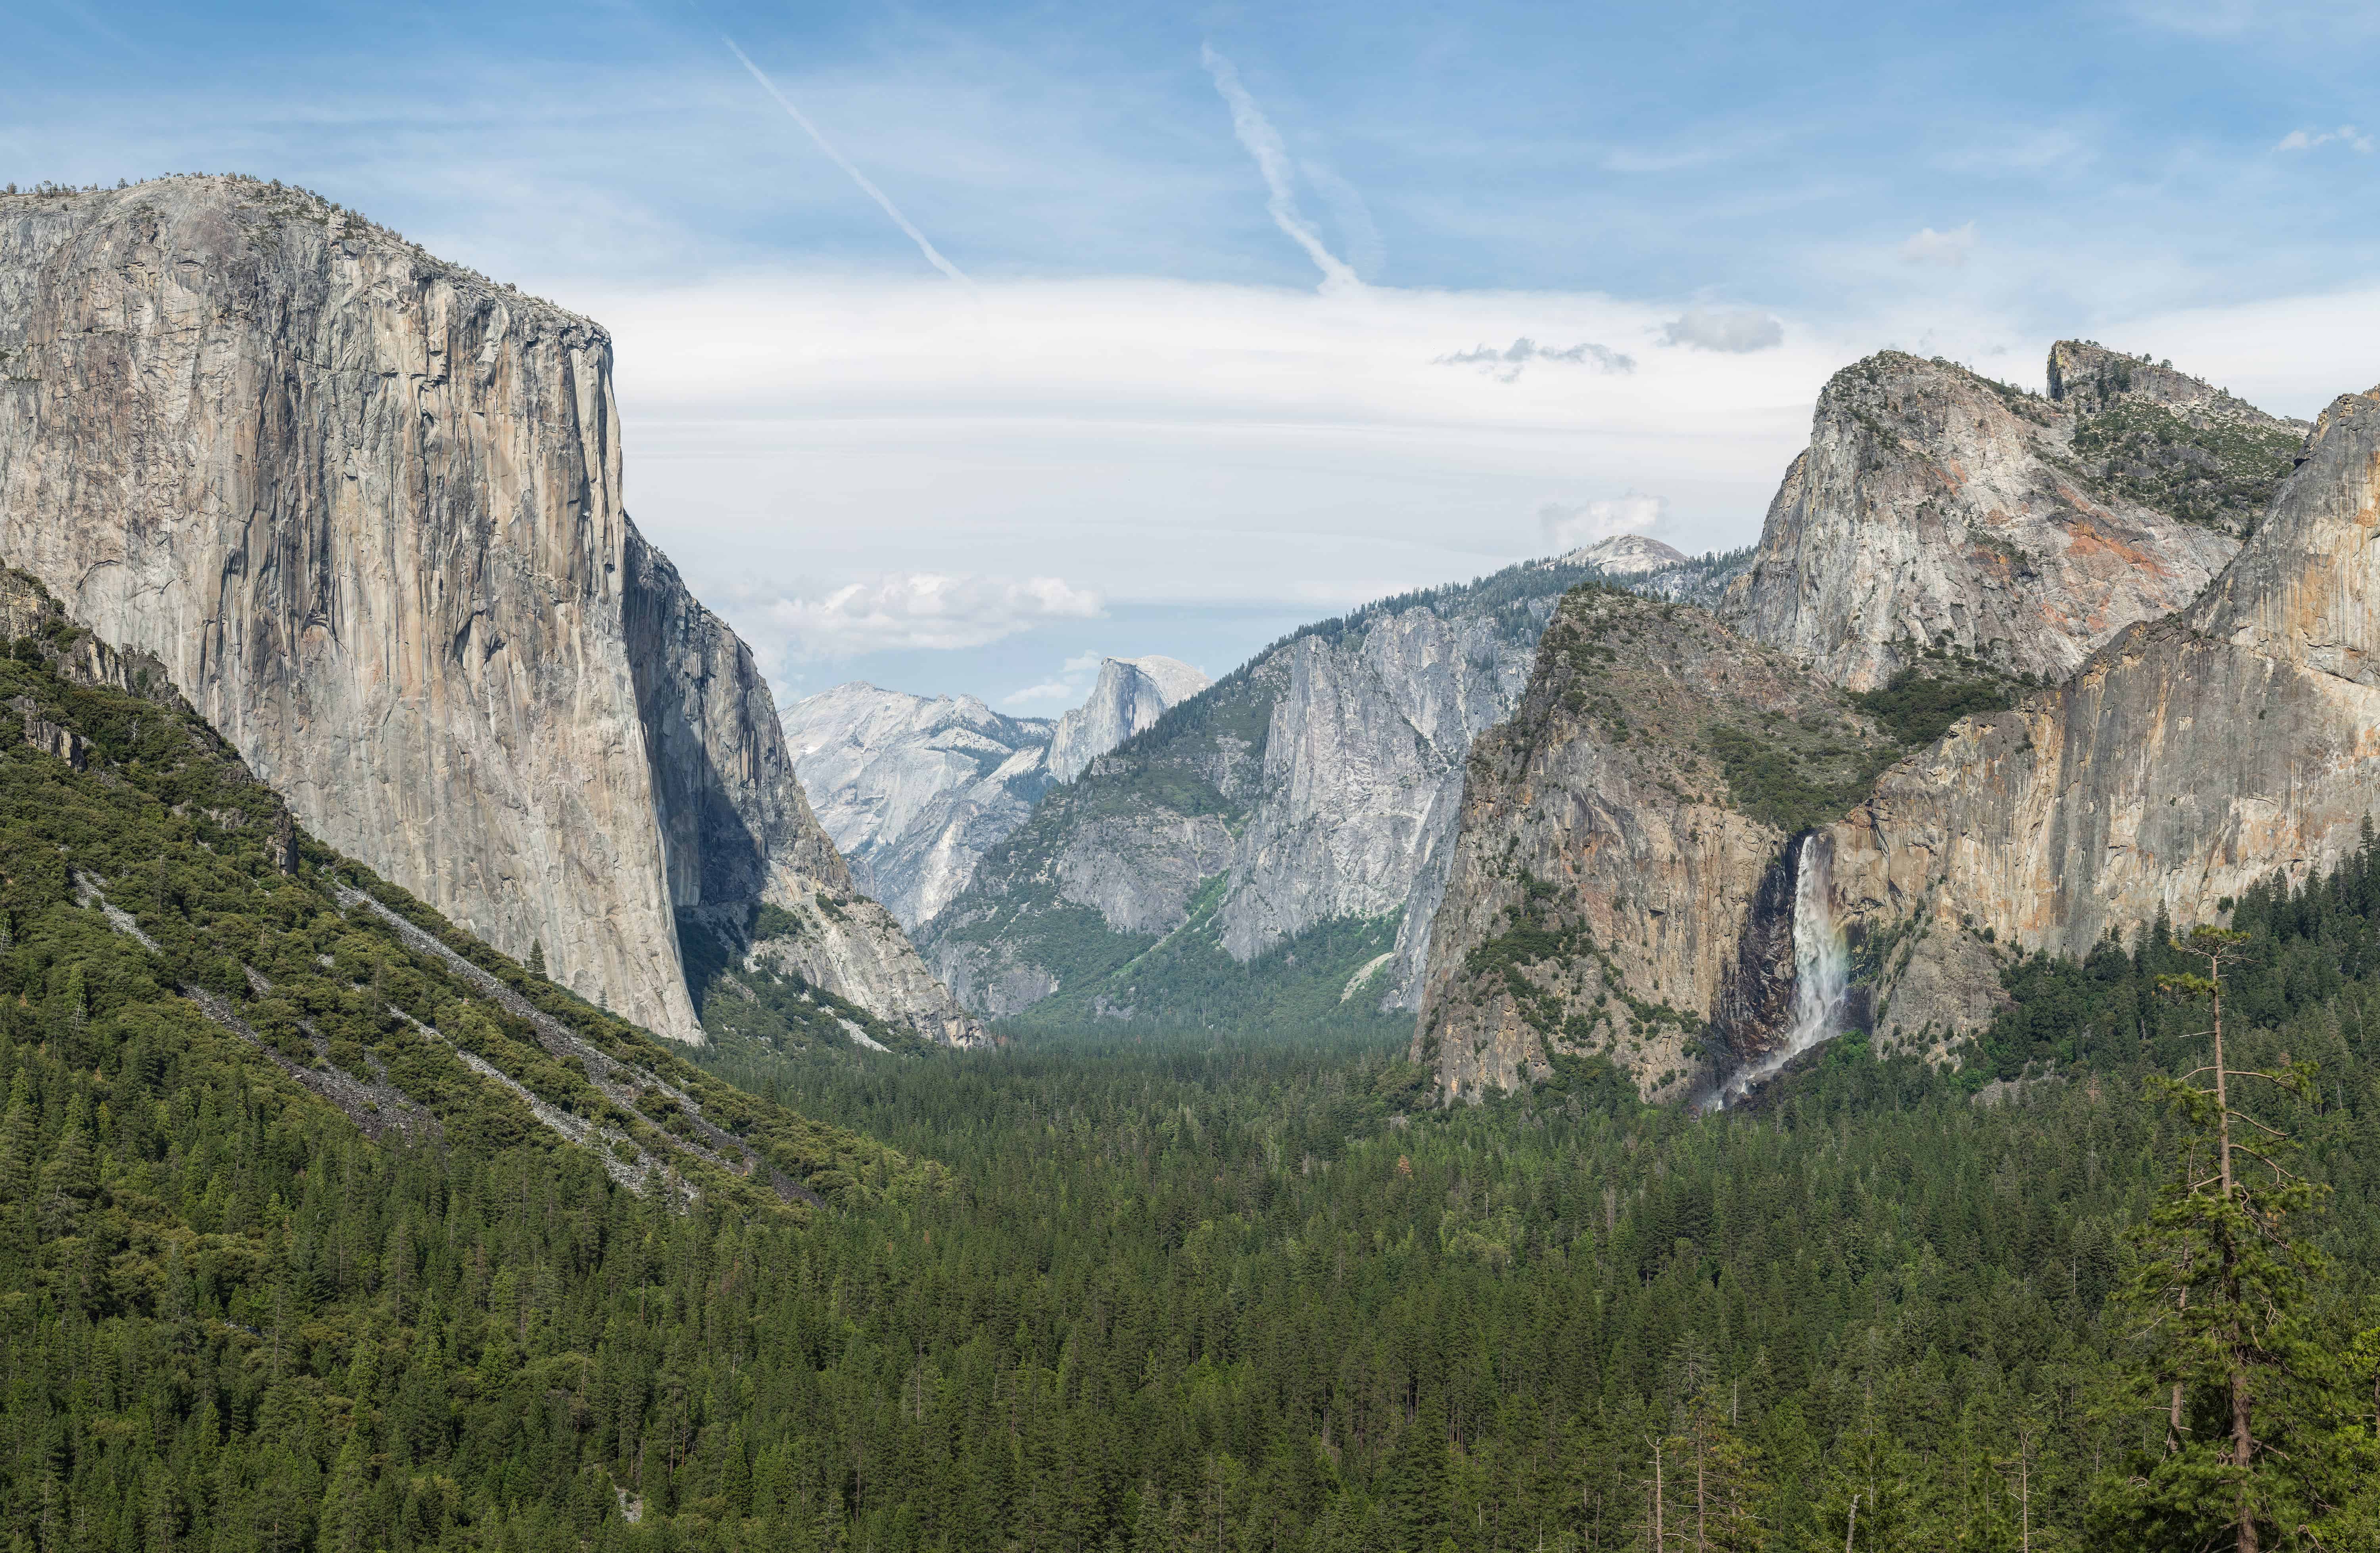 The view of Yosemite Valley from Tunnel View in Yosemite National Park, California, United States. Photo by DAVID ILIFF. License: CC-BY-SA 3.0.